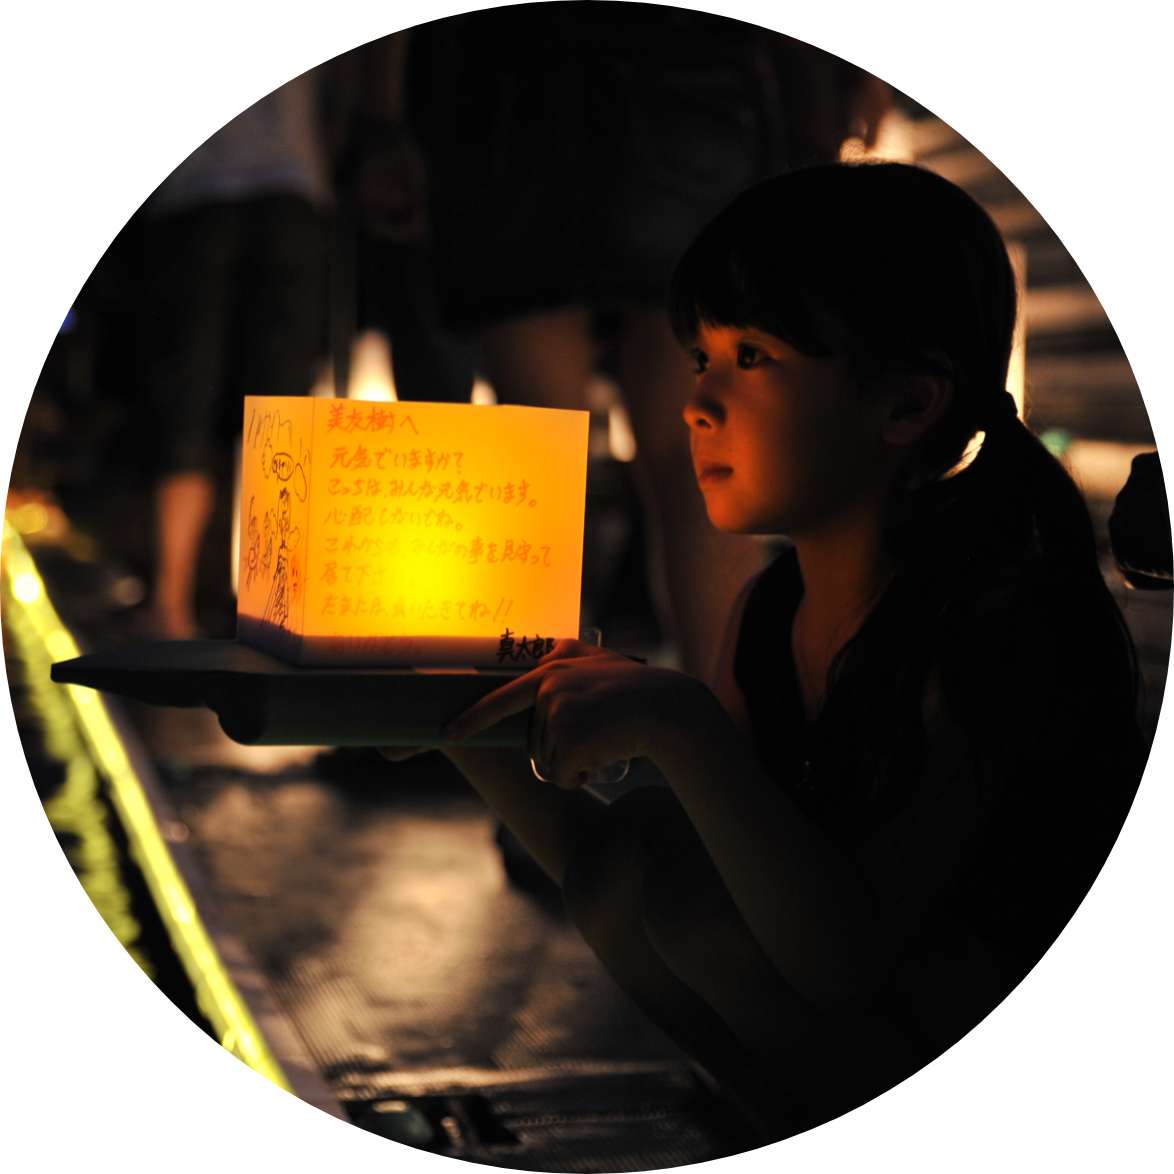 A young girl holds an illuminated lantern, the glow of which lights her face.